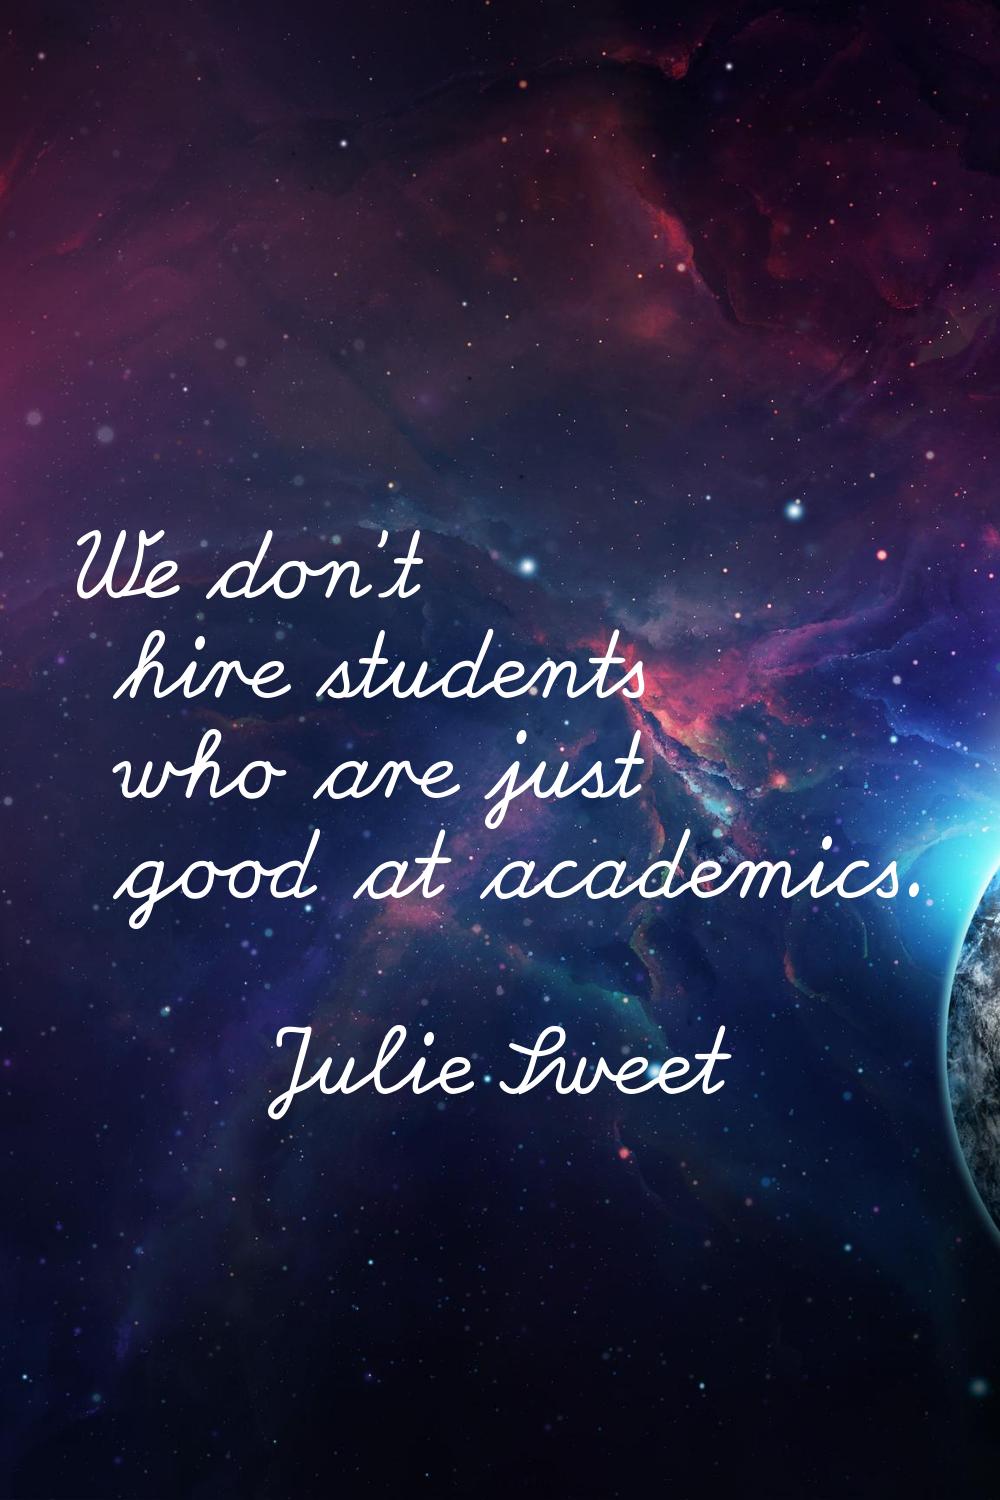 We don't hire students who are just good at academics.